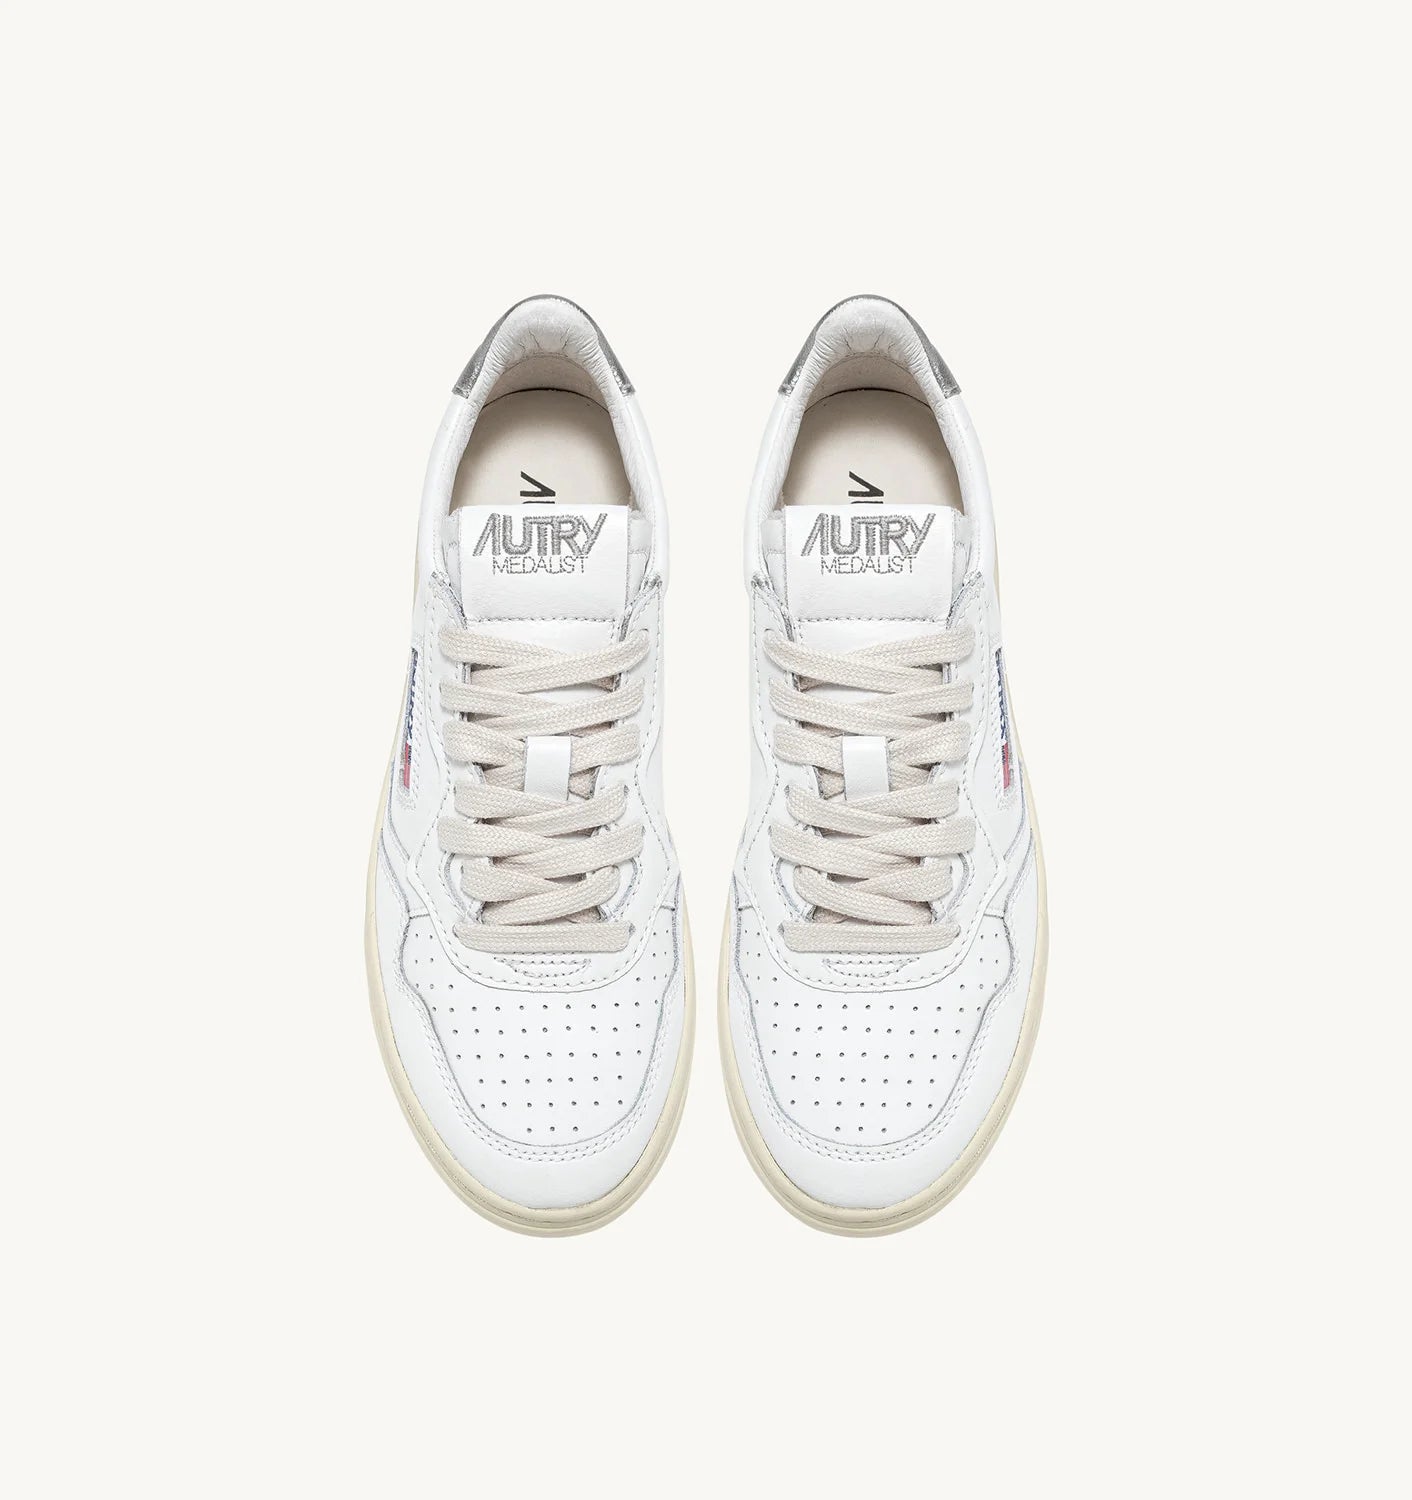 Autry LL05 White/Silver sneakers